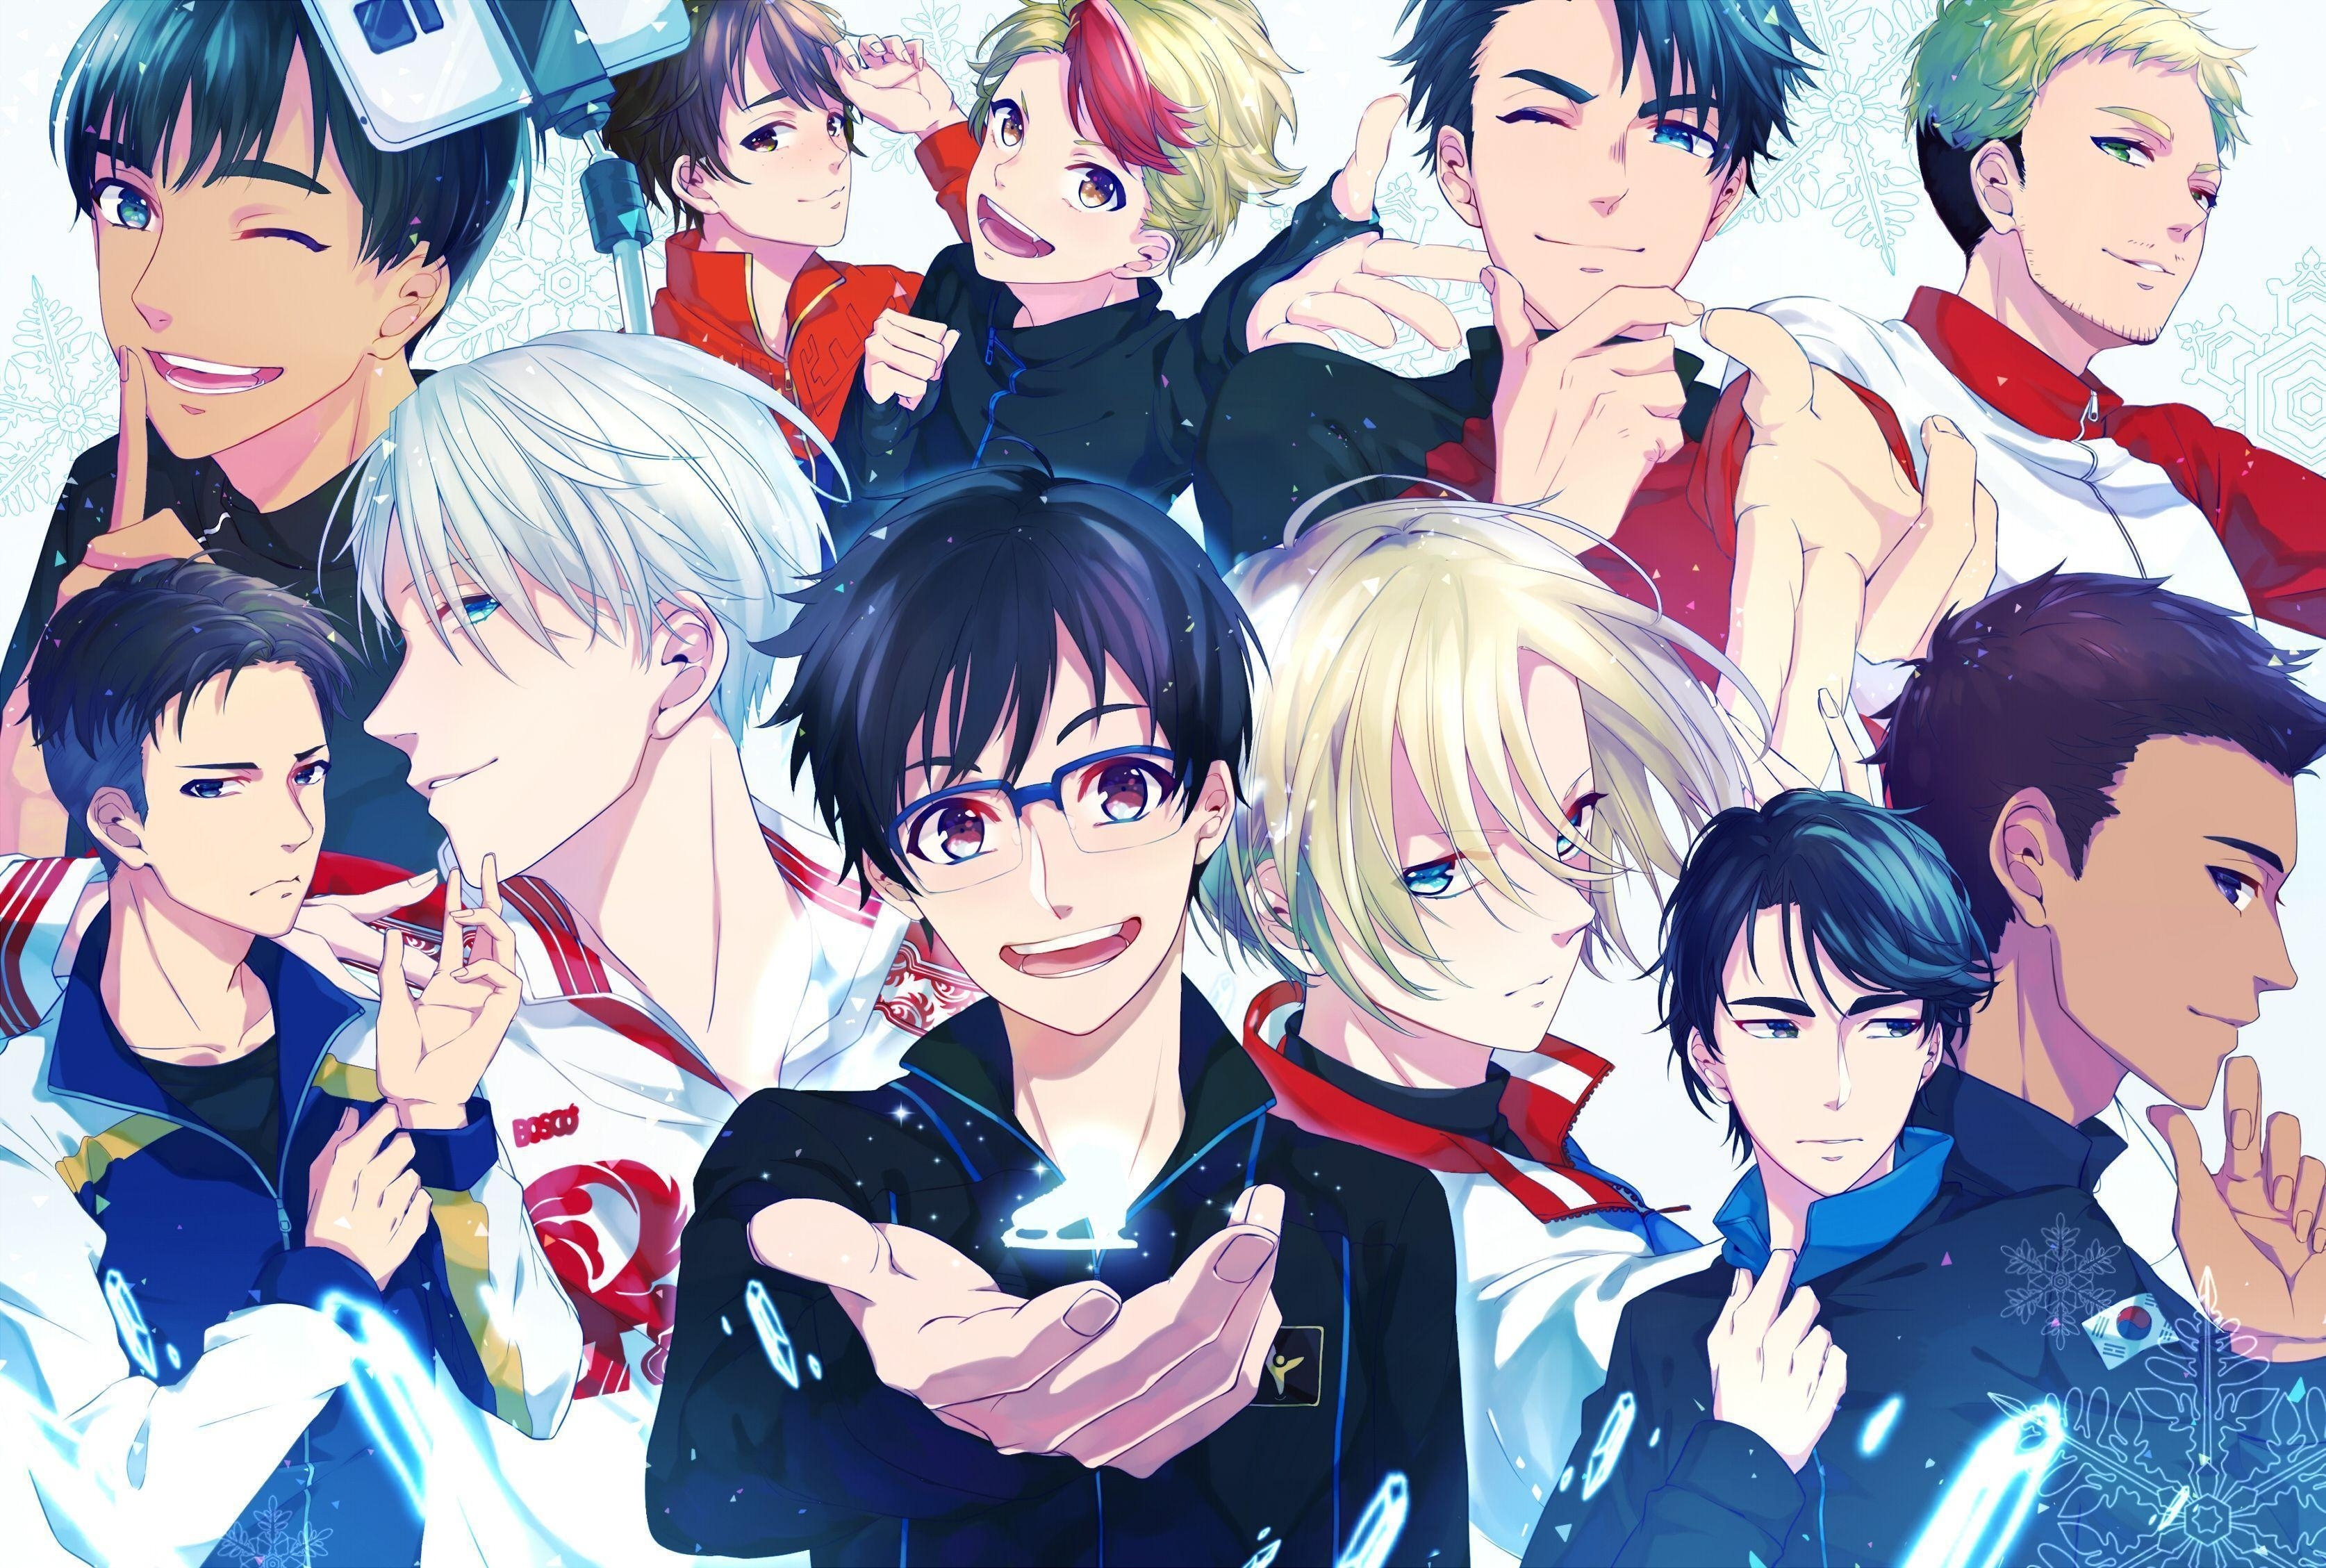 10 New Yuri On Ice Computer Wallpaper FULL HD 1920×1080 For PC Background